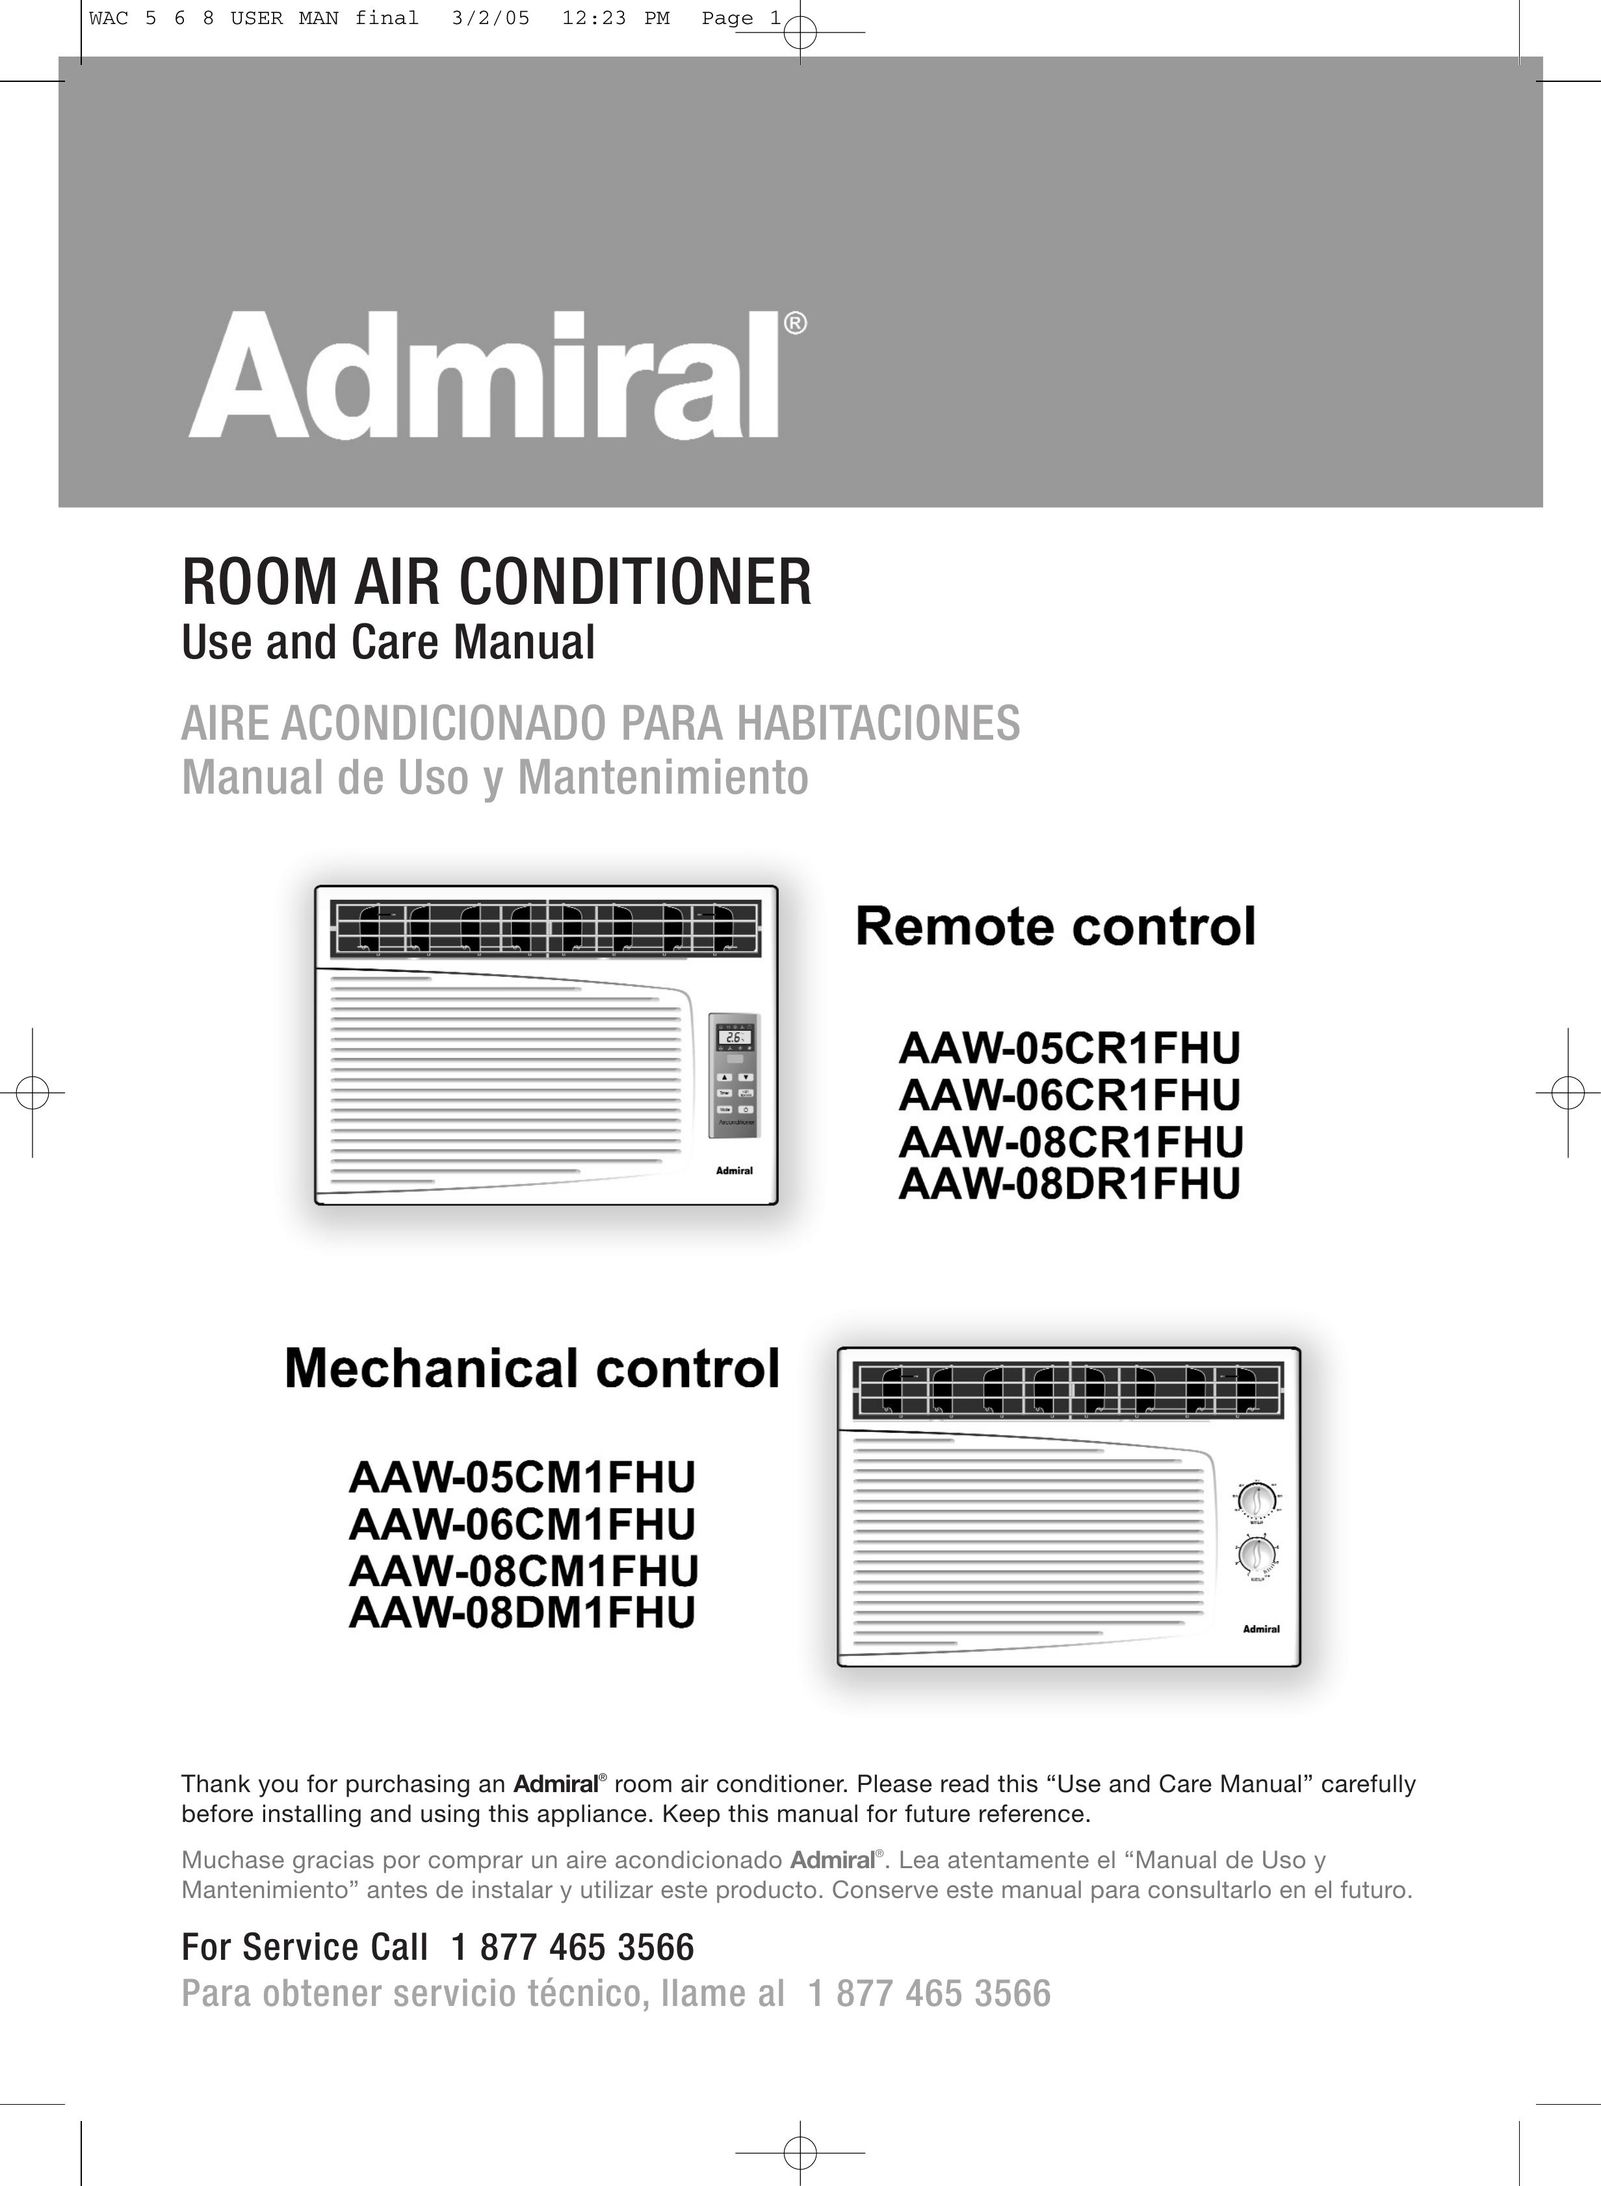 Admiral AAW-O6CM1FHU Air Conditioner User Manual